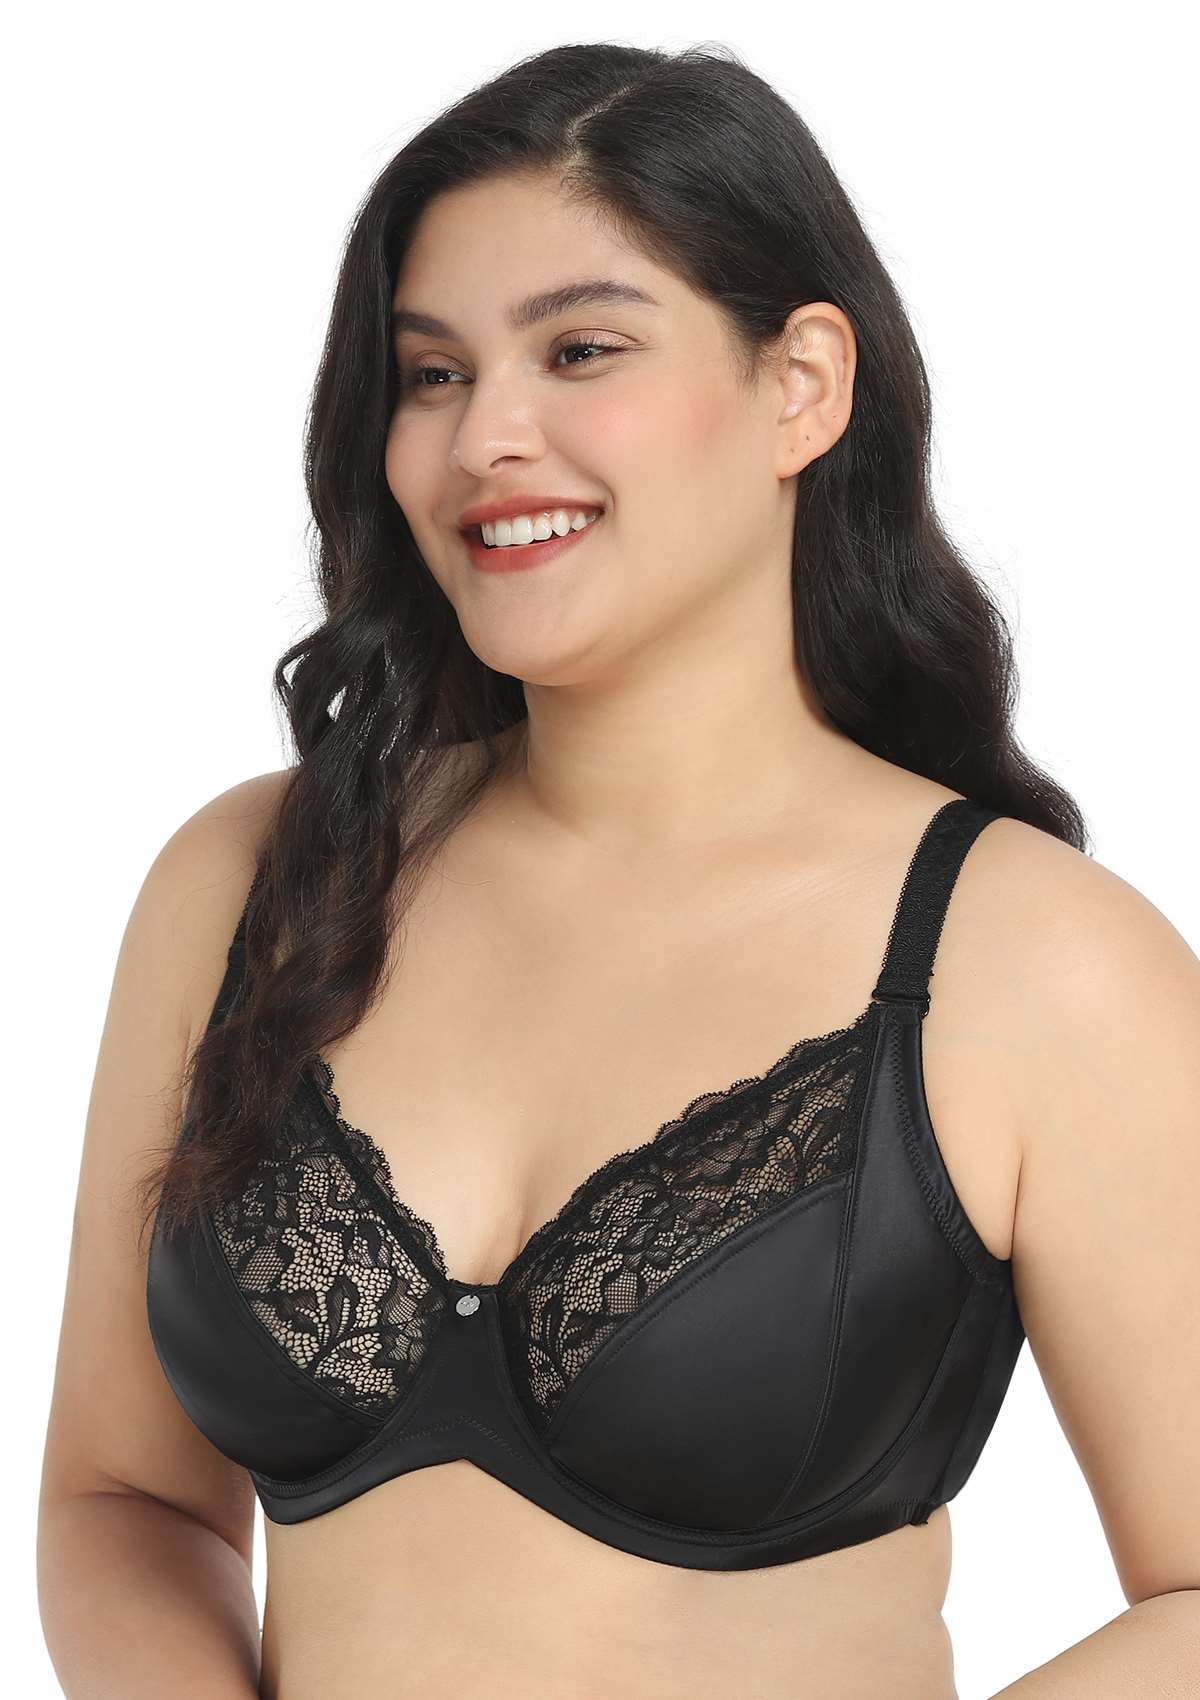 HSIA Foxy Satin Silky Full Coverage Underwire Bra With Floral Lace Trim - Black / 42 / G